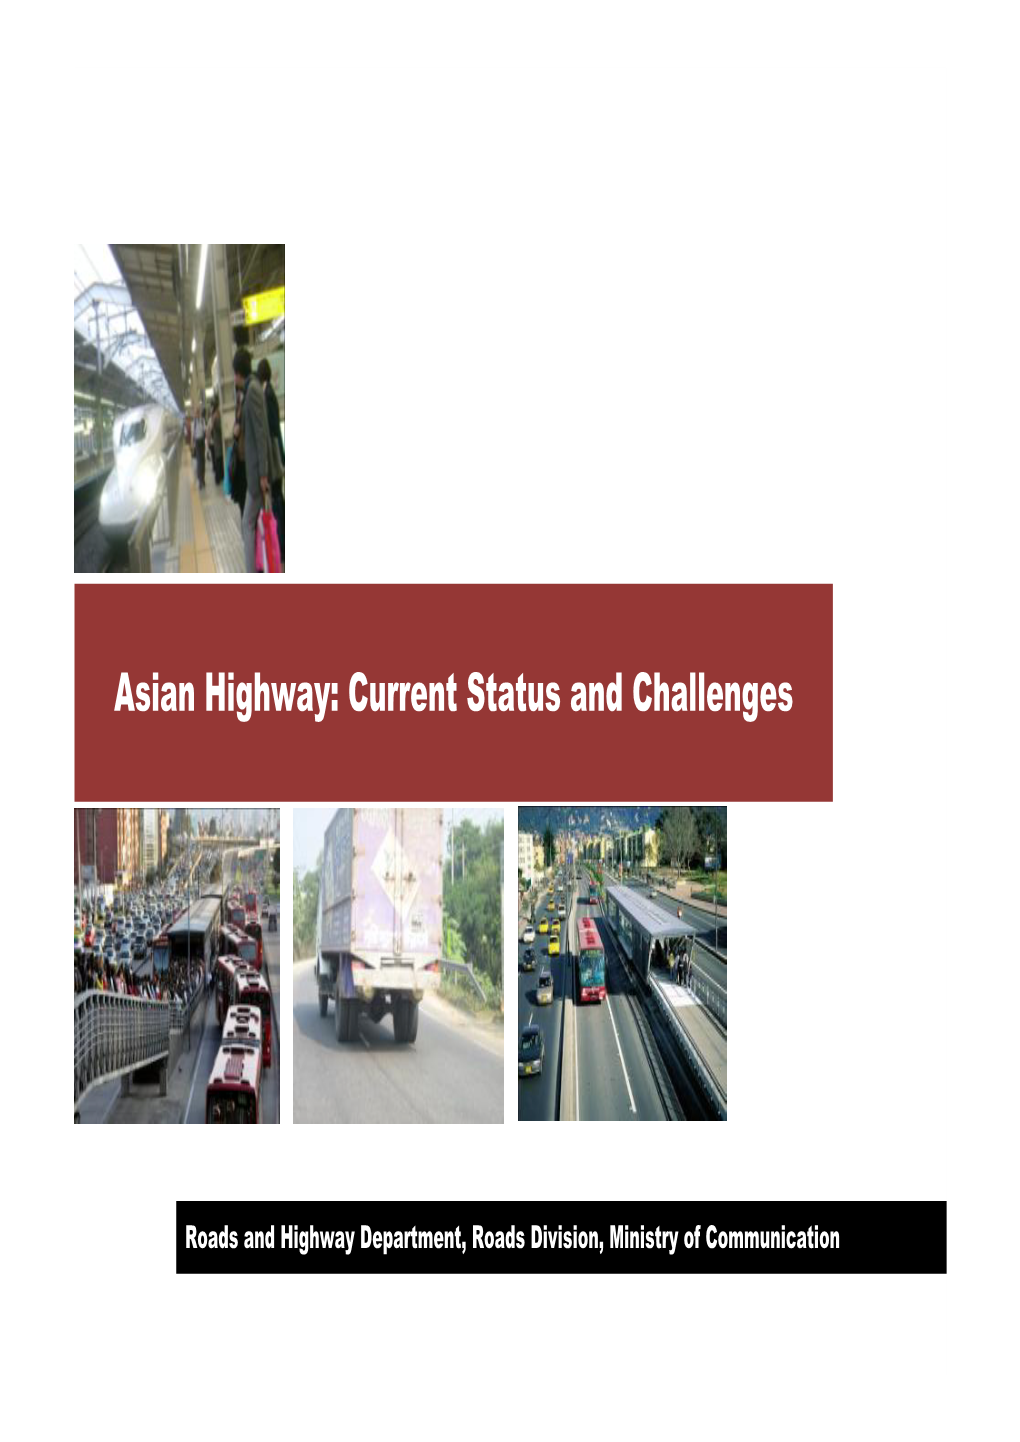 Asian Highway: Current Status and Challenges